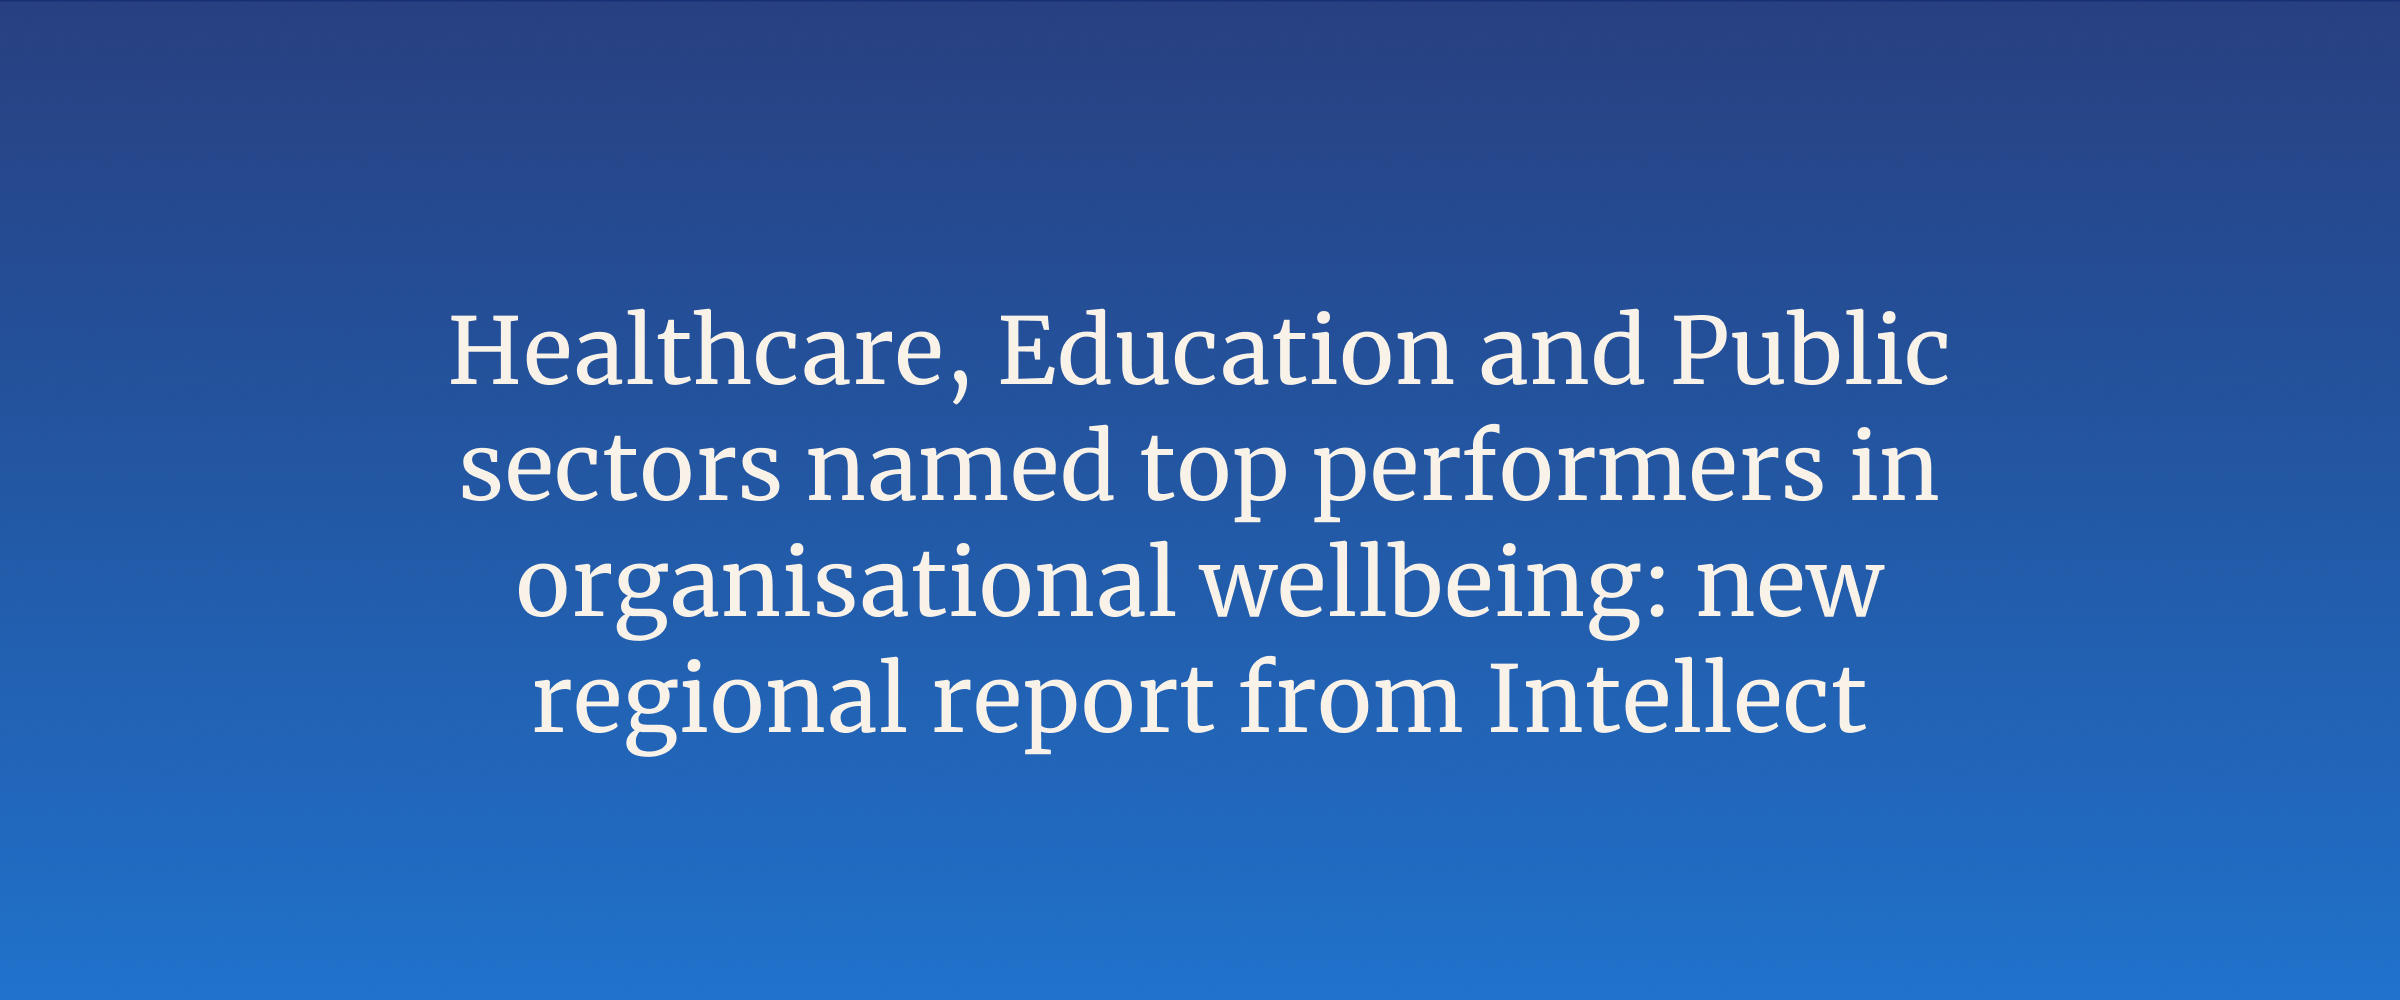 Healthcare, Education and Public sectors named top performers in organisational wellbeing: new regional report from Intellect